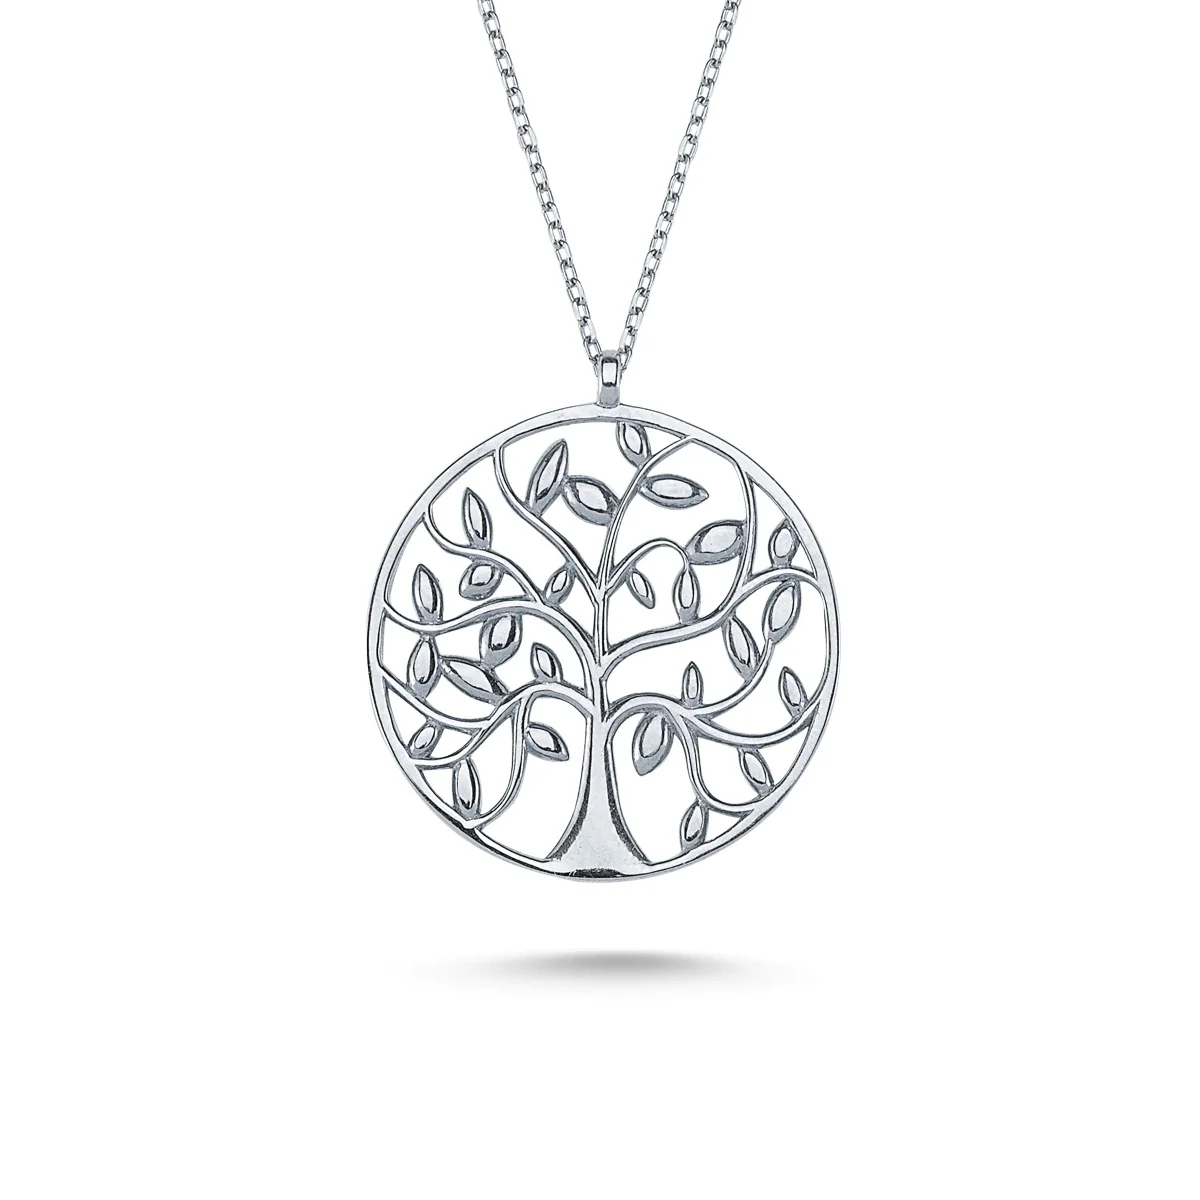 Image of Tree of Life Necklace in silver